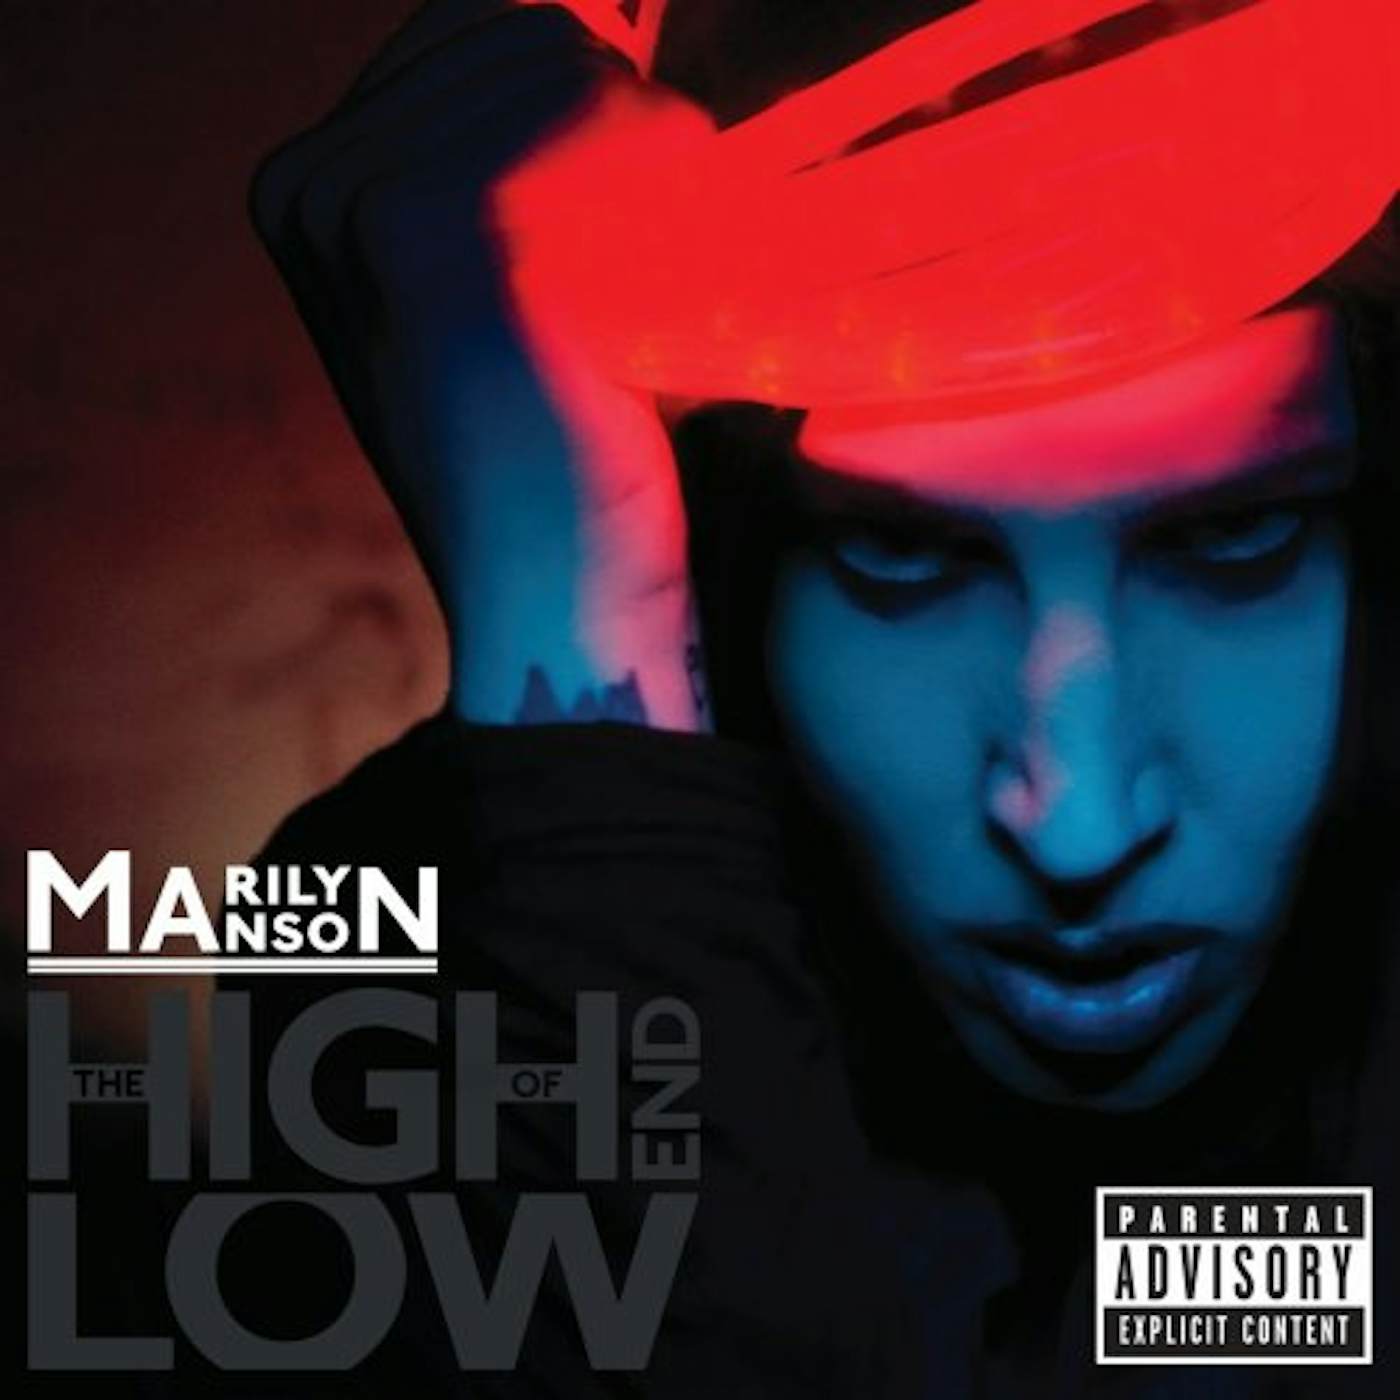 Marilyn Manson HIGH END OF LOW CD